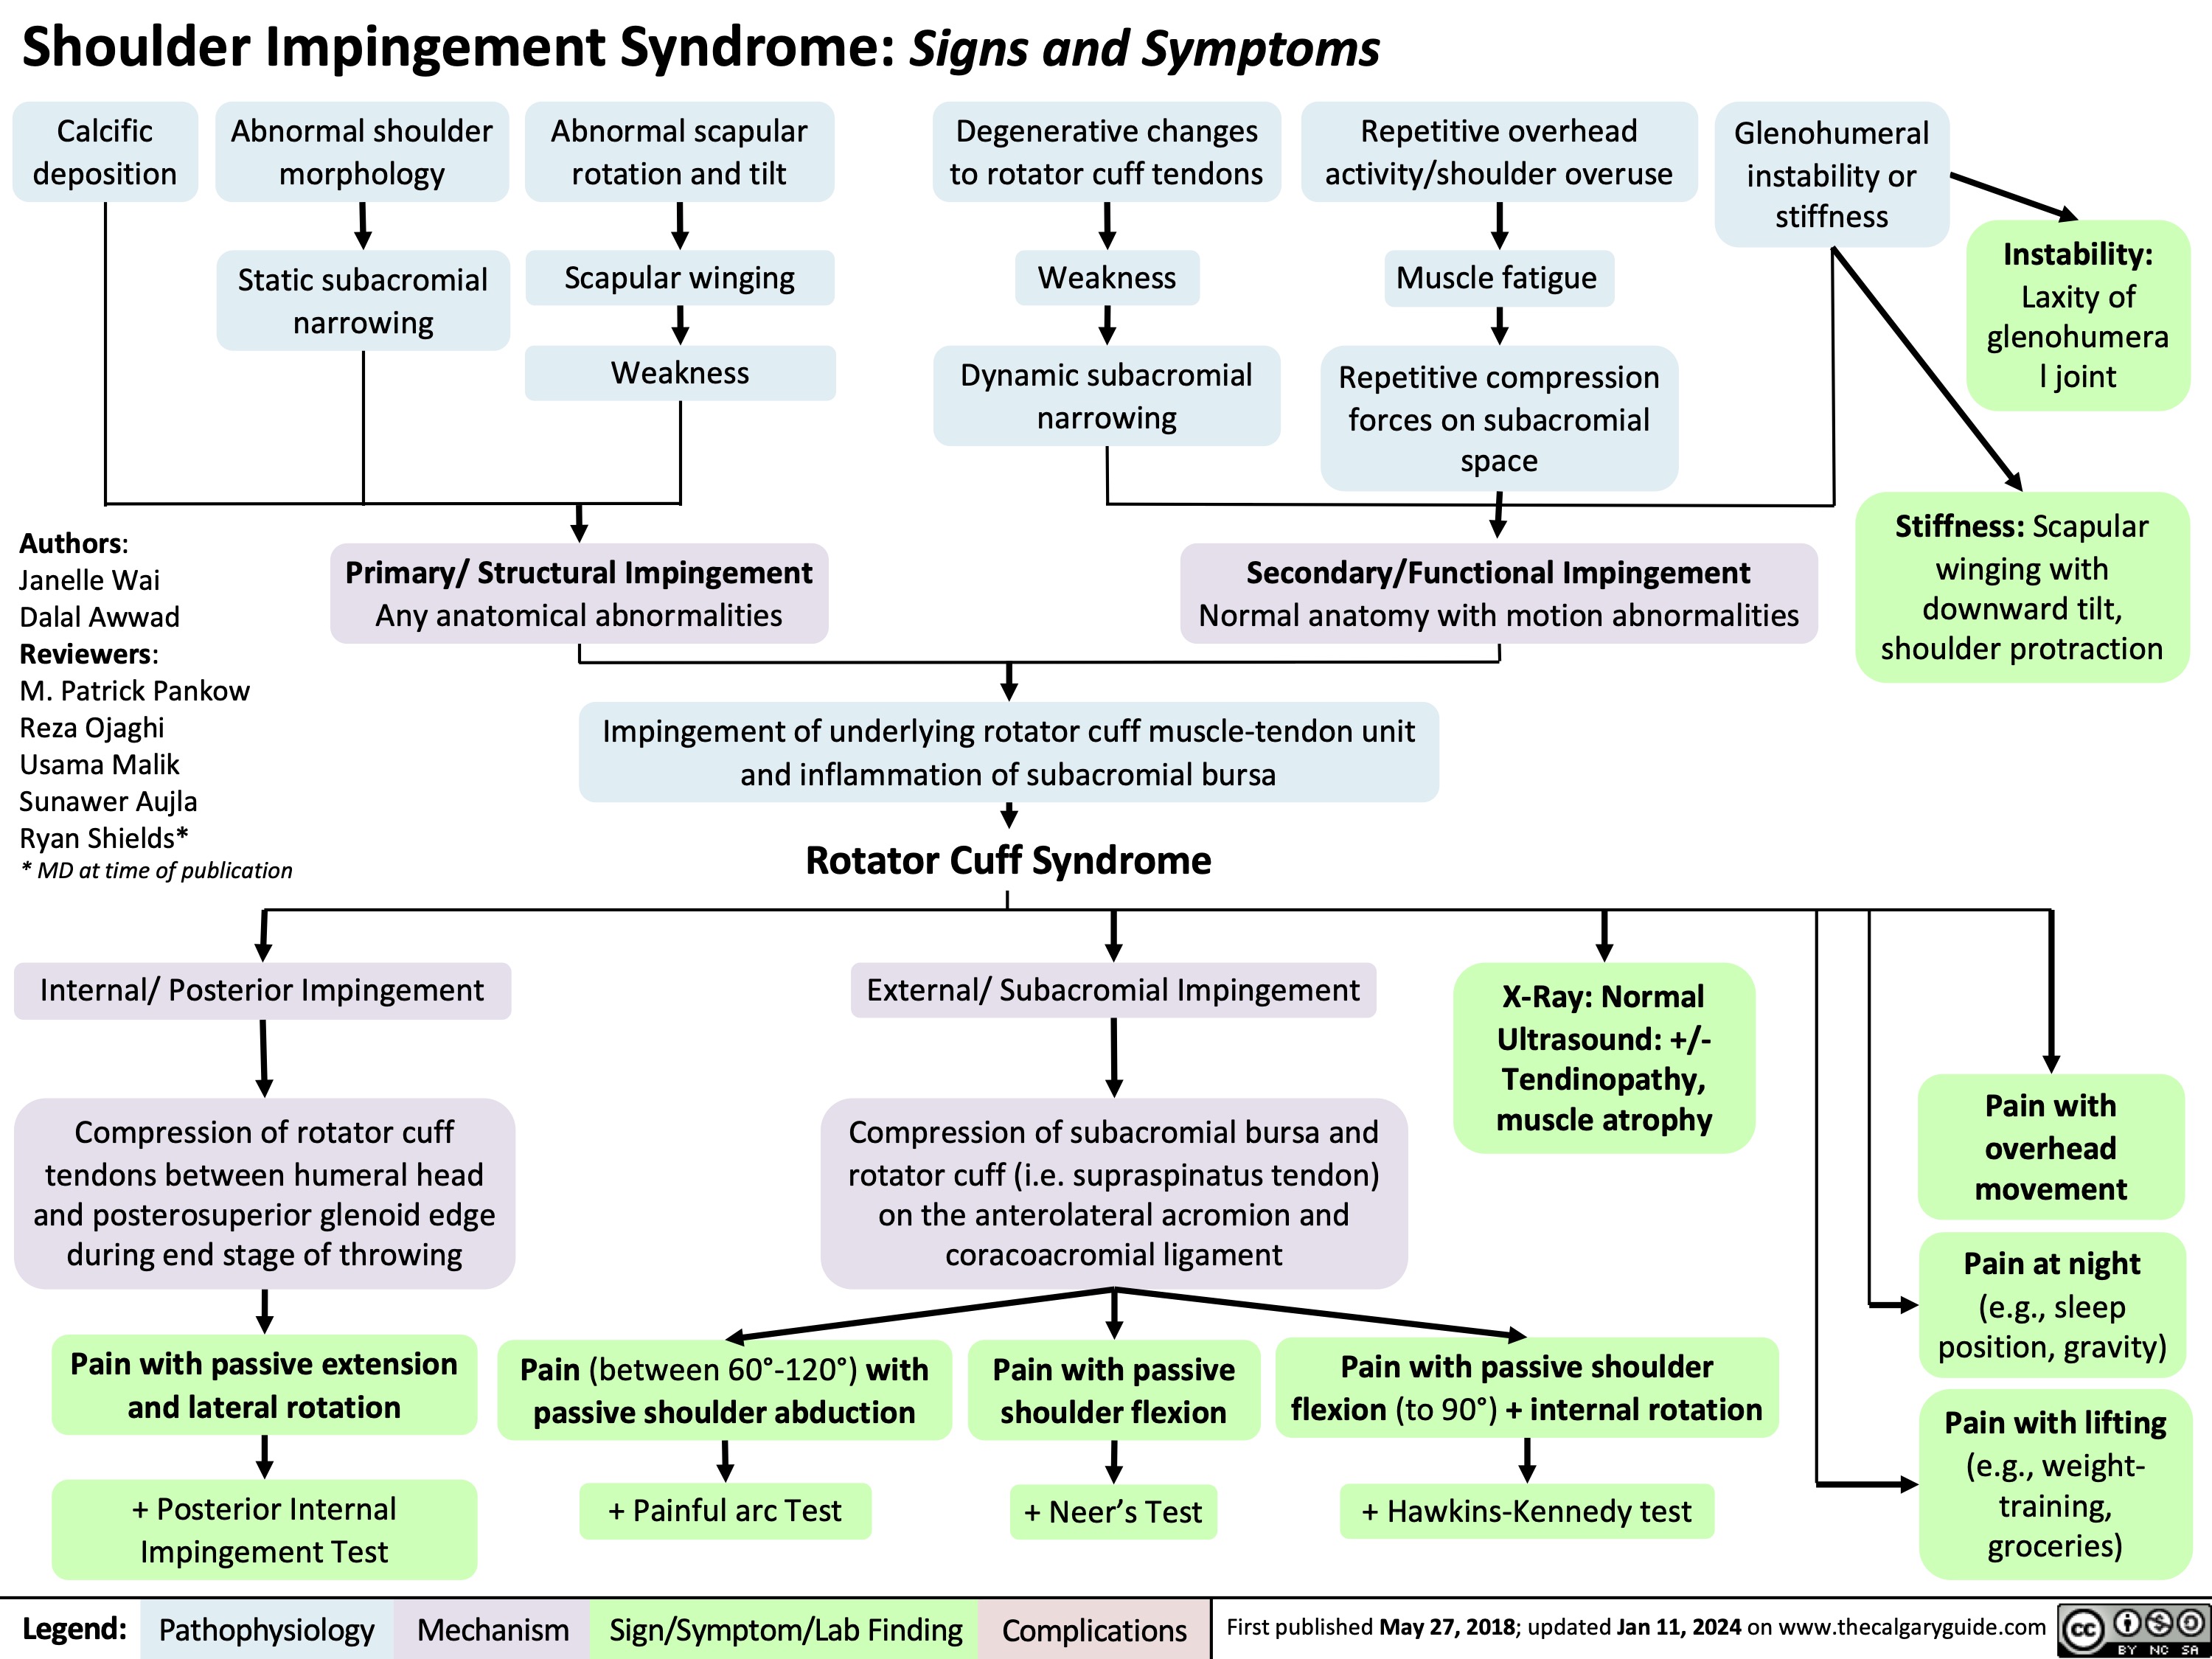 Shoulder Impingement Syndrome: Signs and Symptoms
      Calcific deposition
Abnormal shoulder morphology
Static subacromial narrowing
Abnormal scapular rotation and tilt
Scapular winging Weakness
Degenerative changes to rotator cuff tendons
Weakness
Dynamic subacromial narrowing
Repetitive overhead activity/shoulder overuse
Muscle fatigue
Repetitive compression forces on subacromial space
Glenohumeral instability or stiffness
                Authors:
Janelle Wai
Dalal Awwad Reviewers:
M. Patrick Pankow Reza Ojaghi Usama Malik Sunawer Aujla Ryan Shields*
* MD at time of publication
Internal/ Posterior Impingement
Compression of rotator cuff tendons between humeral head and posterosuperior glenoid edge during end stage of throwing
Pain with passive extension and lateral rotation
+ Posterior Internal Impingement Test
Instability:
Laxity of glenohumera l joint
Stiffness: Scapular winging with downward tilt, shoulder protraction
  Primary/ Structural Impingement
Any anatomical abnormalities
Secondary/Functional Impingement
Normal anatomy with motion abnormalities
  Impingement of underlying rotator cuff muscle-tendon unit and inflammation of subacromial bursa
Rotator Cuff Syndrome
External/ Subacromial Impingement
Compression of subacromial bursa and rotator cuff (i.e. supraspinatus tendon) on the anterolateral acromion and coracoacromial ligament
X-Ray: Normal Ultrasound: +/- Tendinopathy, muscle atrophy
Pain with
overhead movement
Pain at night
(e.g., sleep position, gravity)
Pain with lifting
(e.g., weight- training, groceries)
                Pain (between 60°-120°) with passive shoulder abduction
+ Painful arc Test
Pain with passive shoulder flexion
+ Neer’s Test
Pain with passive shoulder flexion (to 90°) + internal rotation
+ Hawkins-Kennedy test
      Legend:
 Pathophysiology
Mechanism
 Sign/Symptom/Lab Finding
 Complications
 First published May 27, 2018; updated Jan 11, 2024 on www.thecalgaryguide.com
  